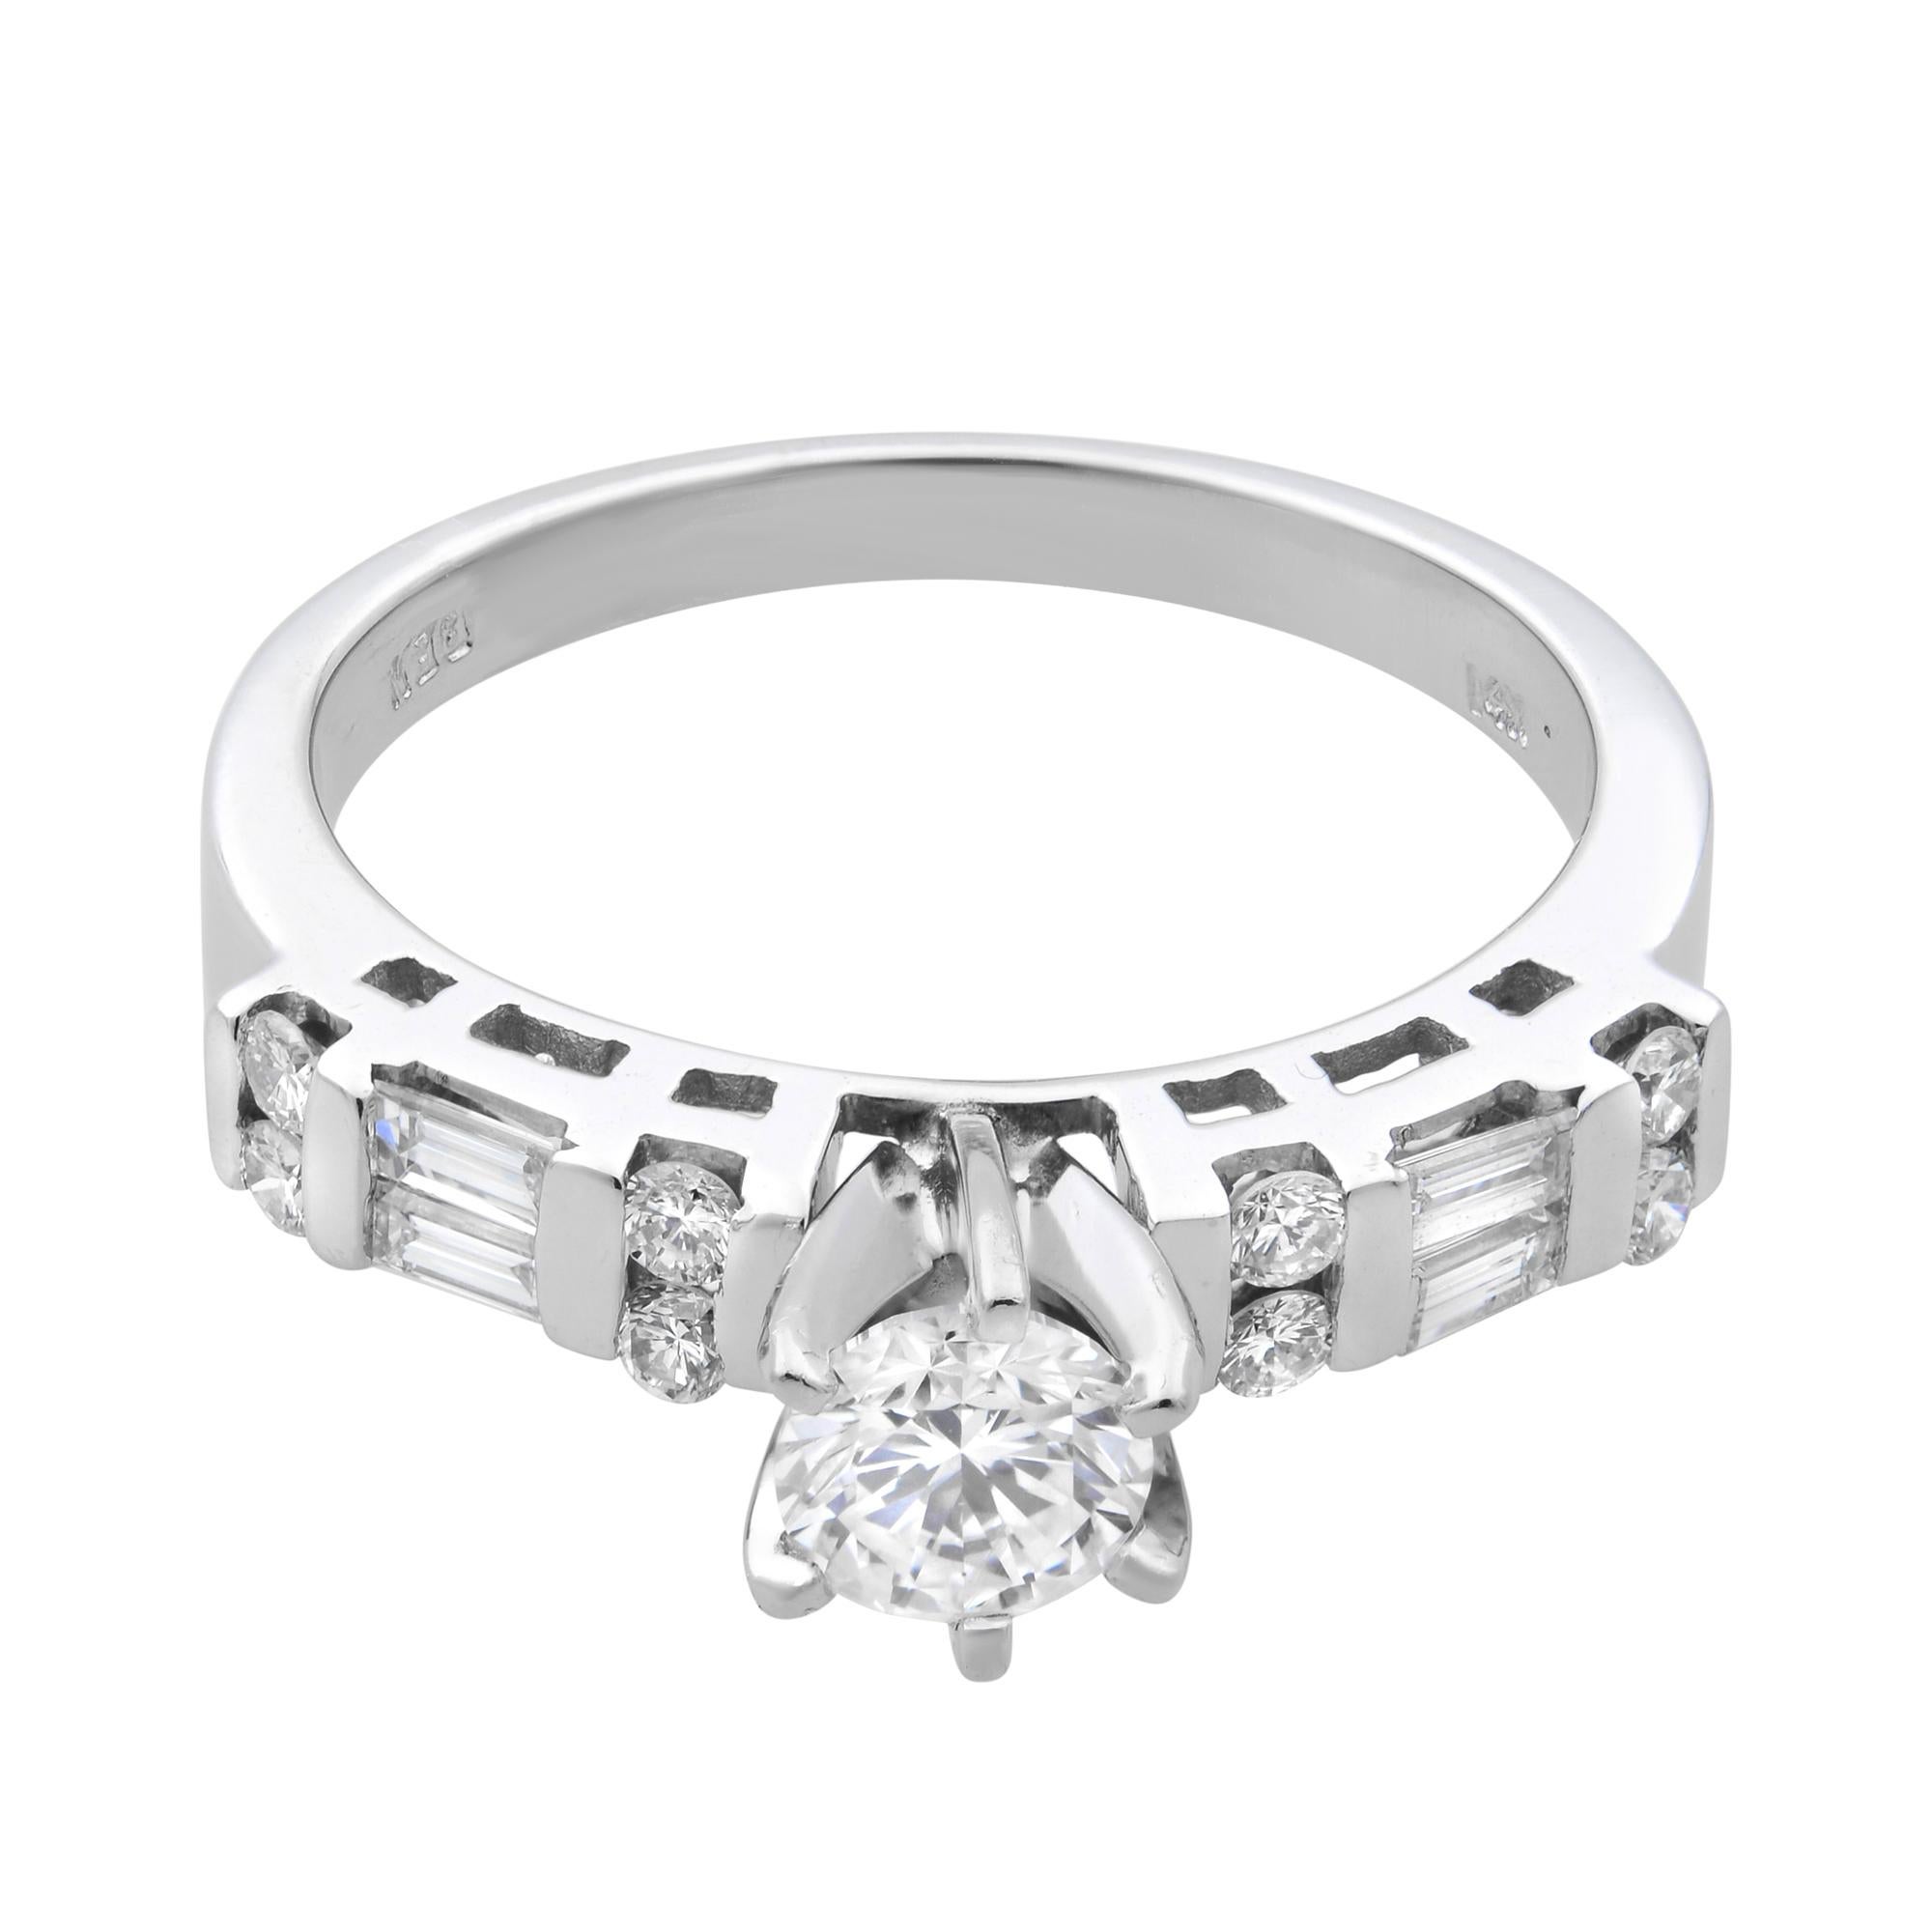 This beautiful and alluring engagement ring features a center round brilliant cut diamond weighing 0.50 carat in prong setting, flanked by Baguette and round cut diamonds on ring shoulders to add more beauty. Crafted in highly polished 14k white